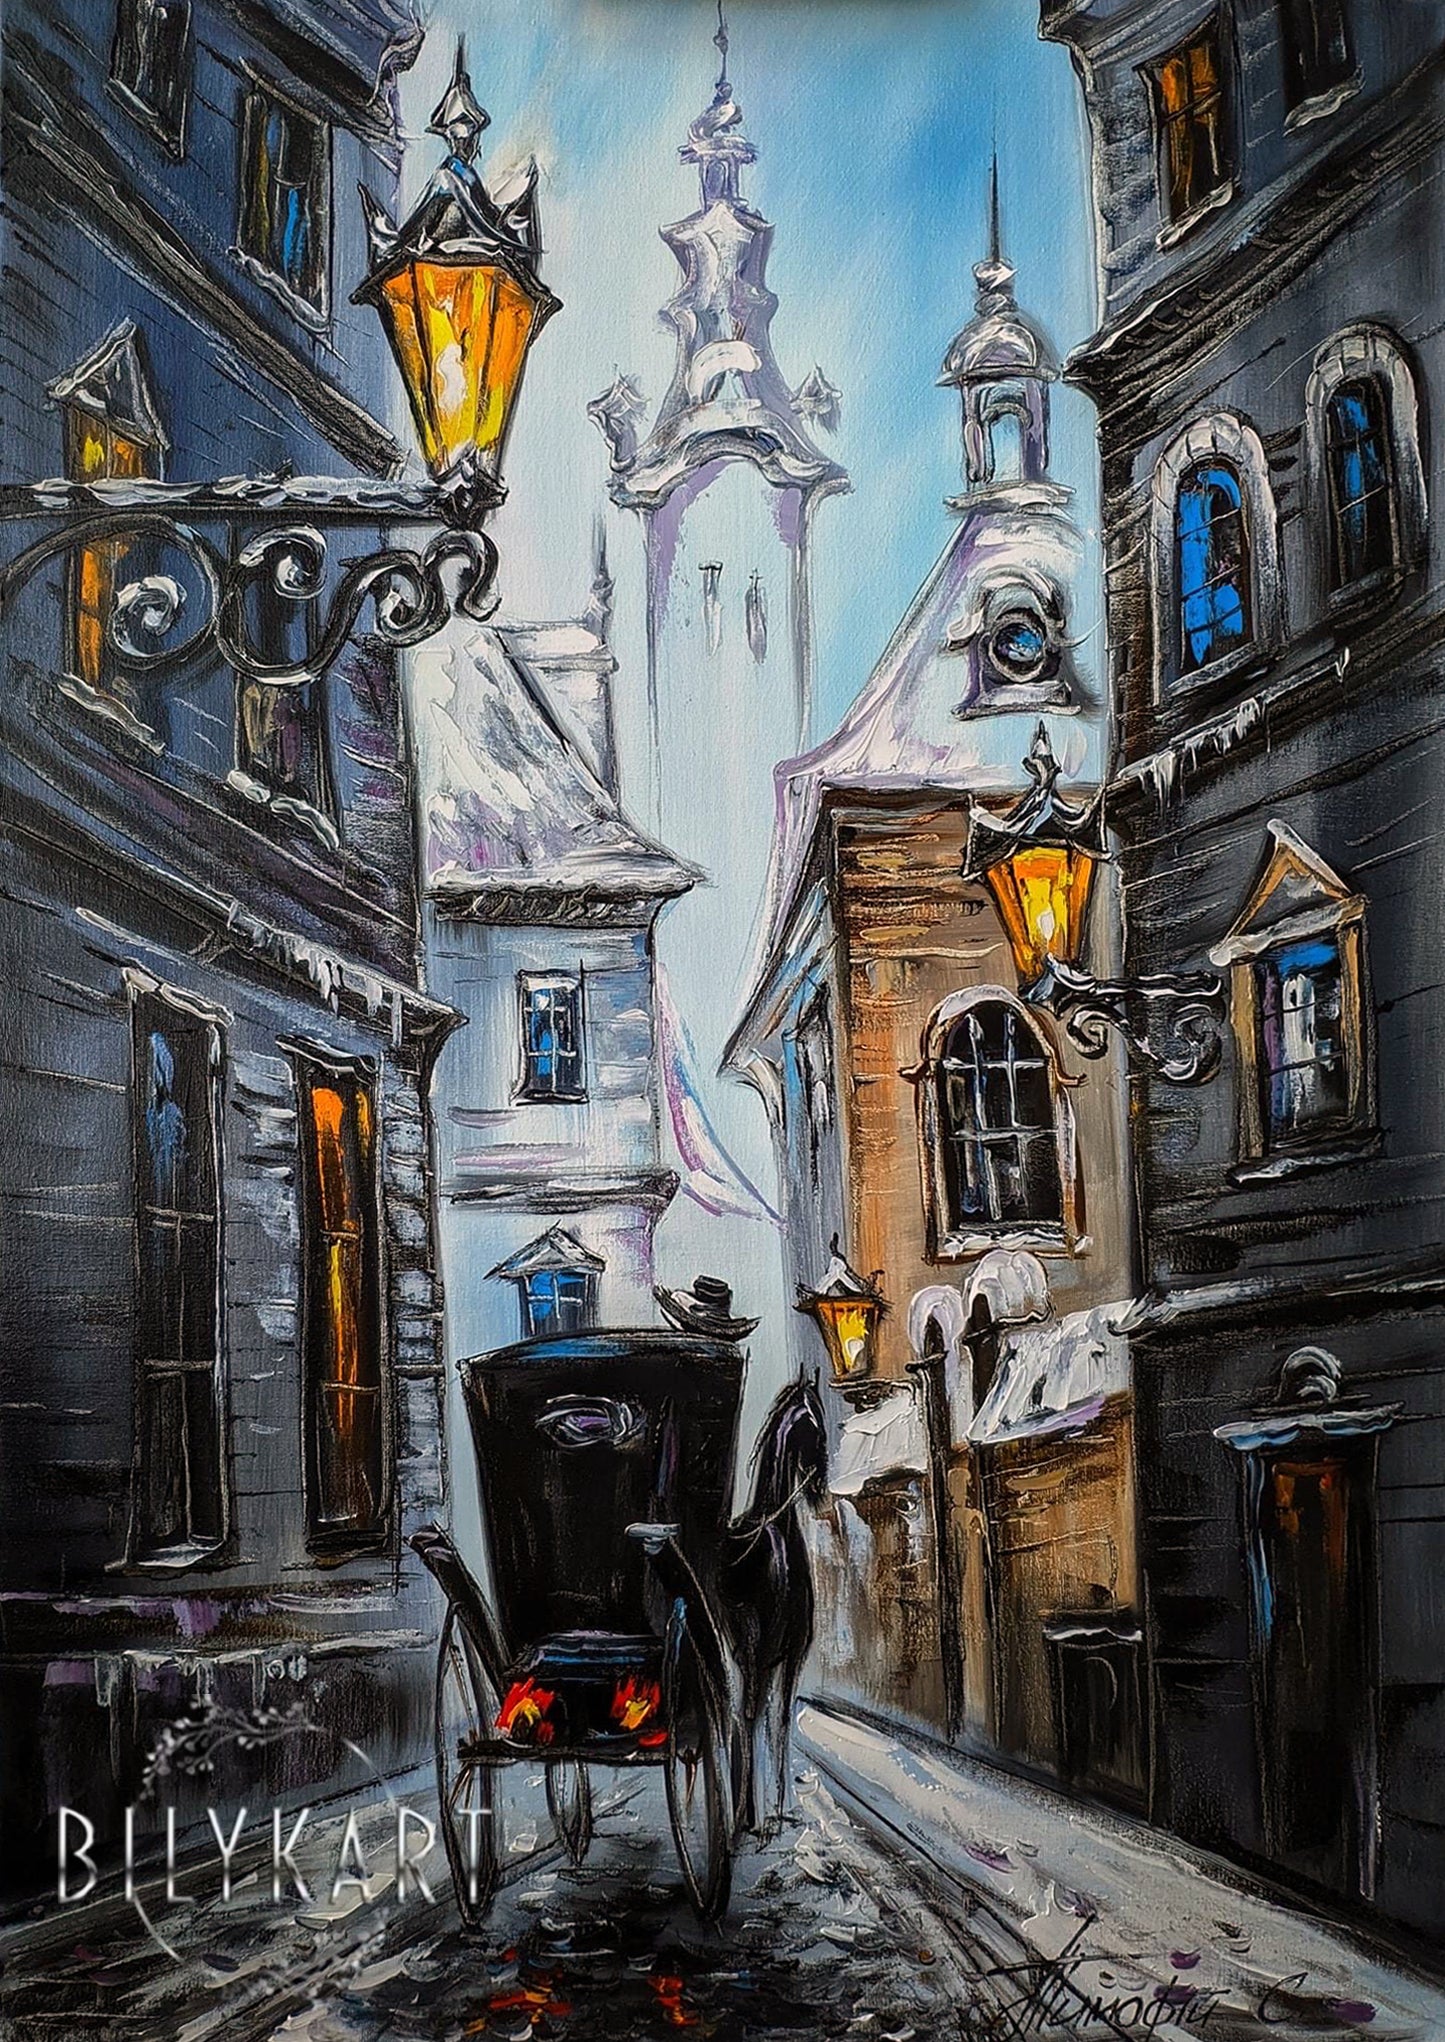 European Town Oil Painting Original Horse and Carriage Painting on Canvas Paintings of European Cities Europe Gift